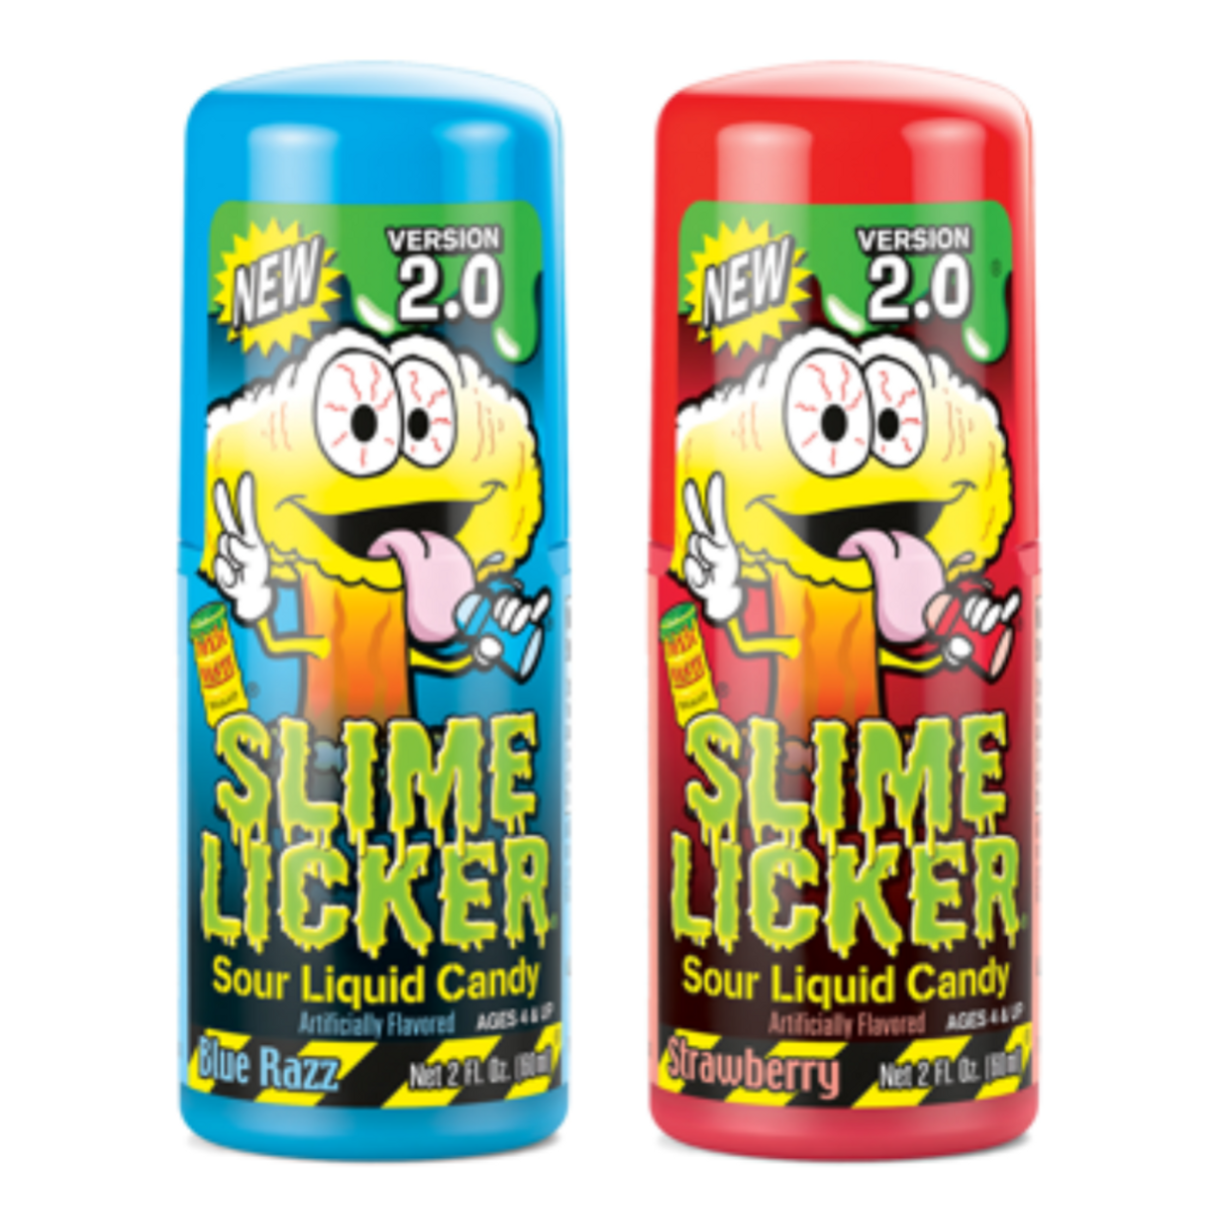 Toxic Waste Slime Licker 2.0 Version Sour Liquid Candy 2oz - 96ct